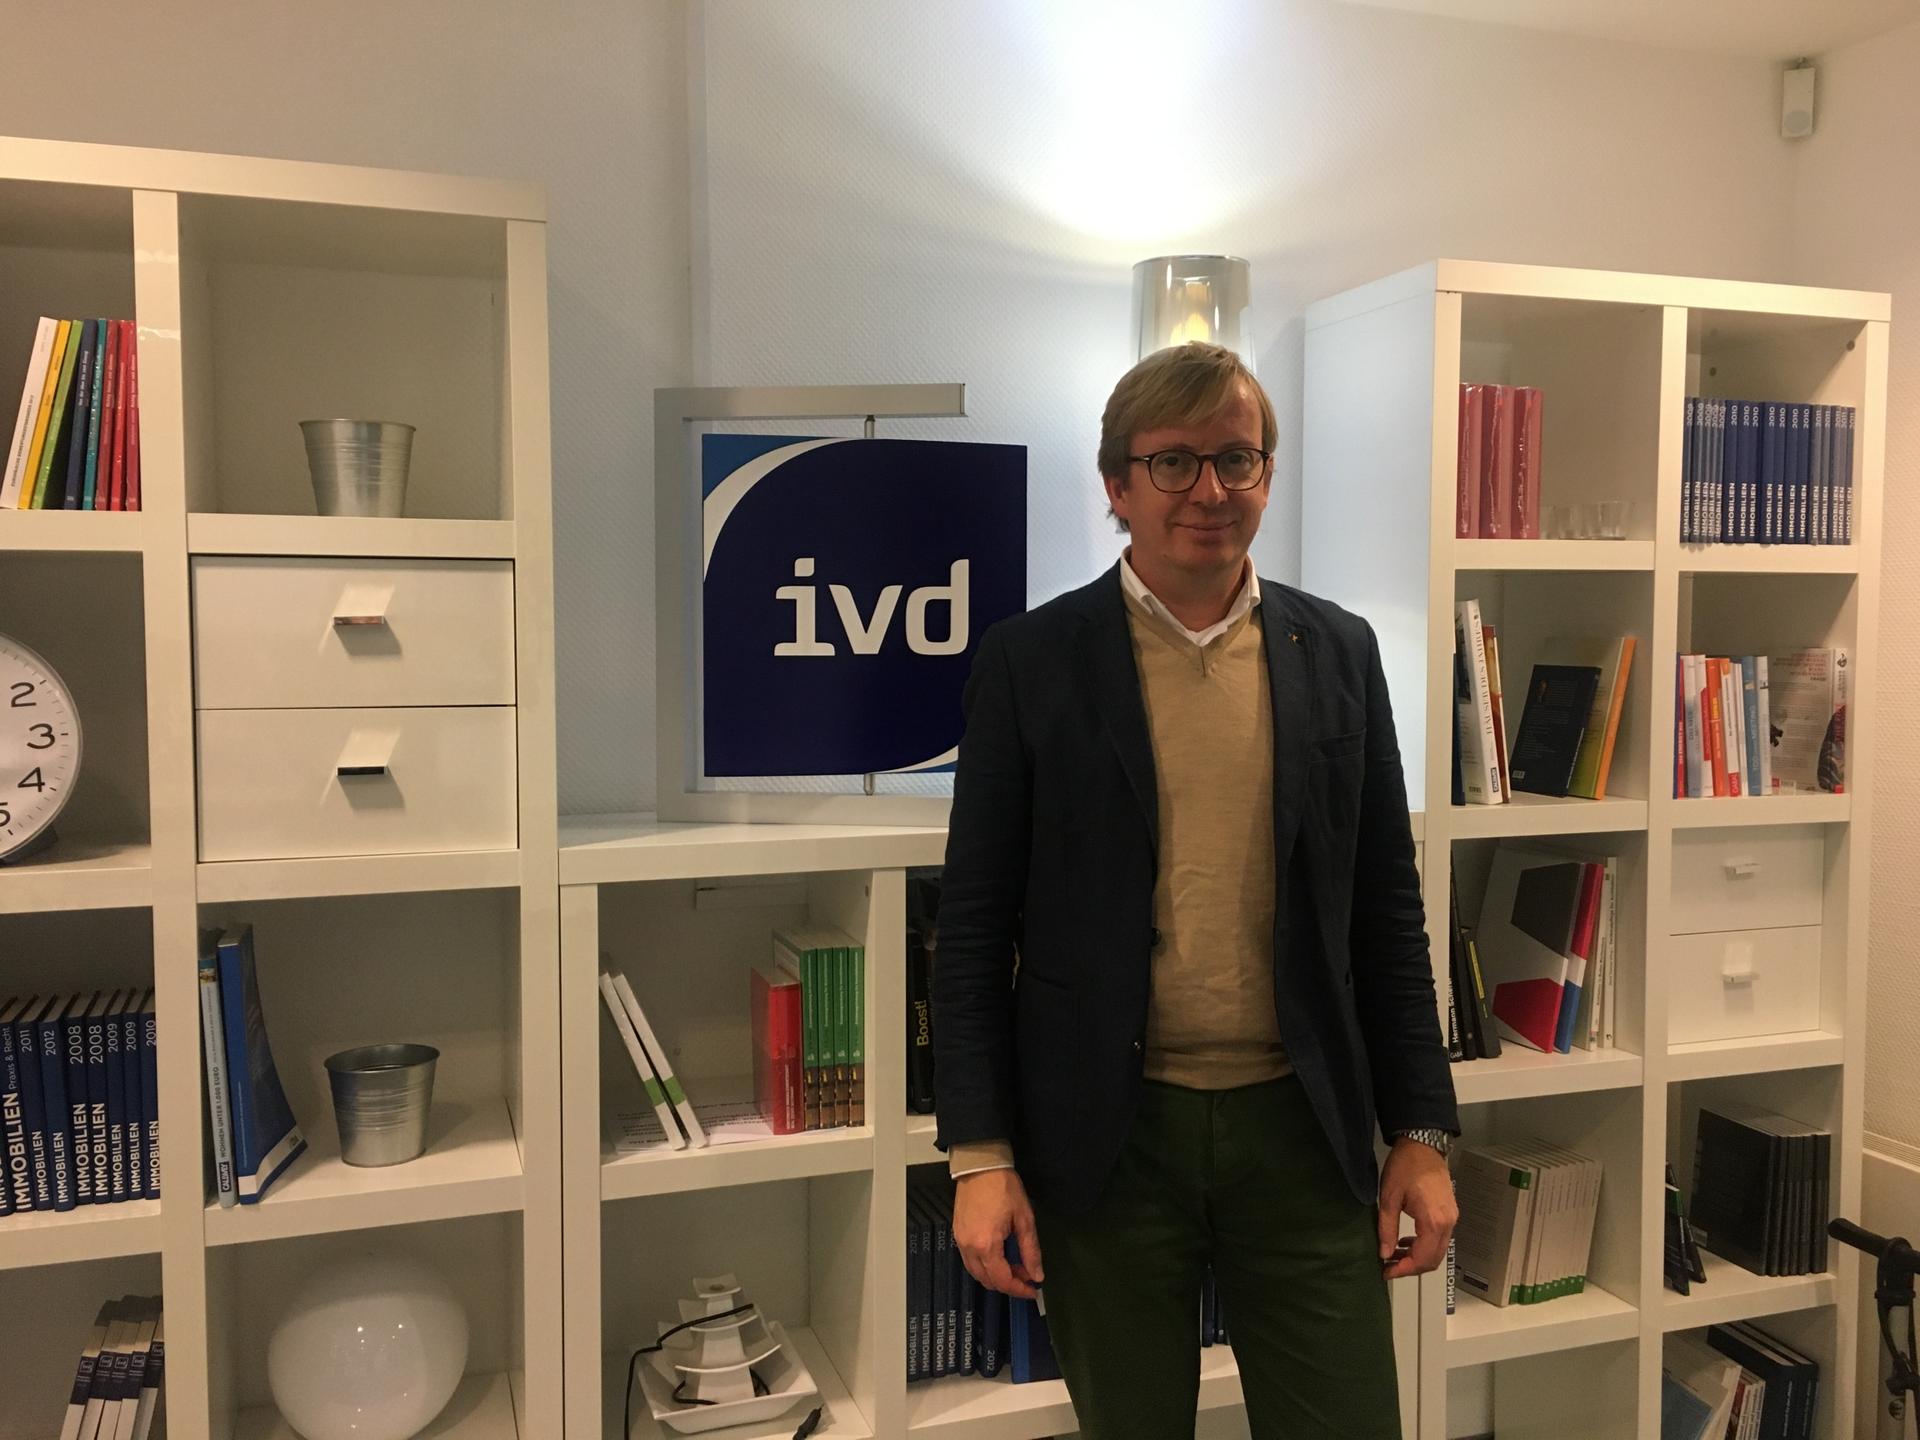 Christian Osthus is the vice director with IVD, which represents over 6,000 real estate agents and property managers in Germany. Osthus said he wasn’t surprised by the recent German court ruling lifting a rent cap in Berlin, although he says he doesn’t ag